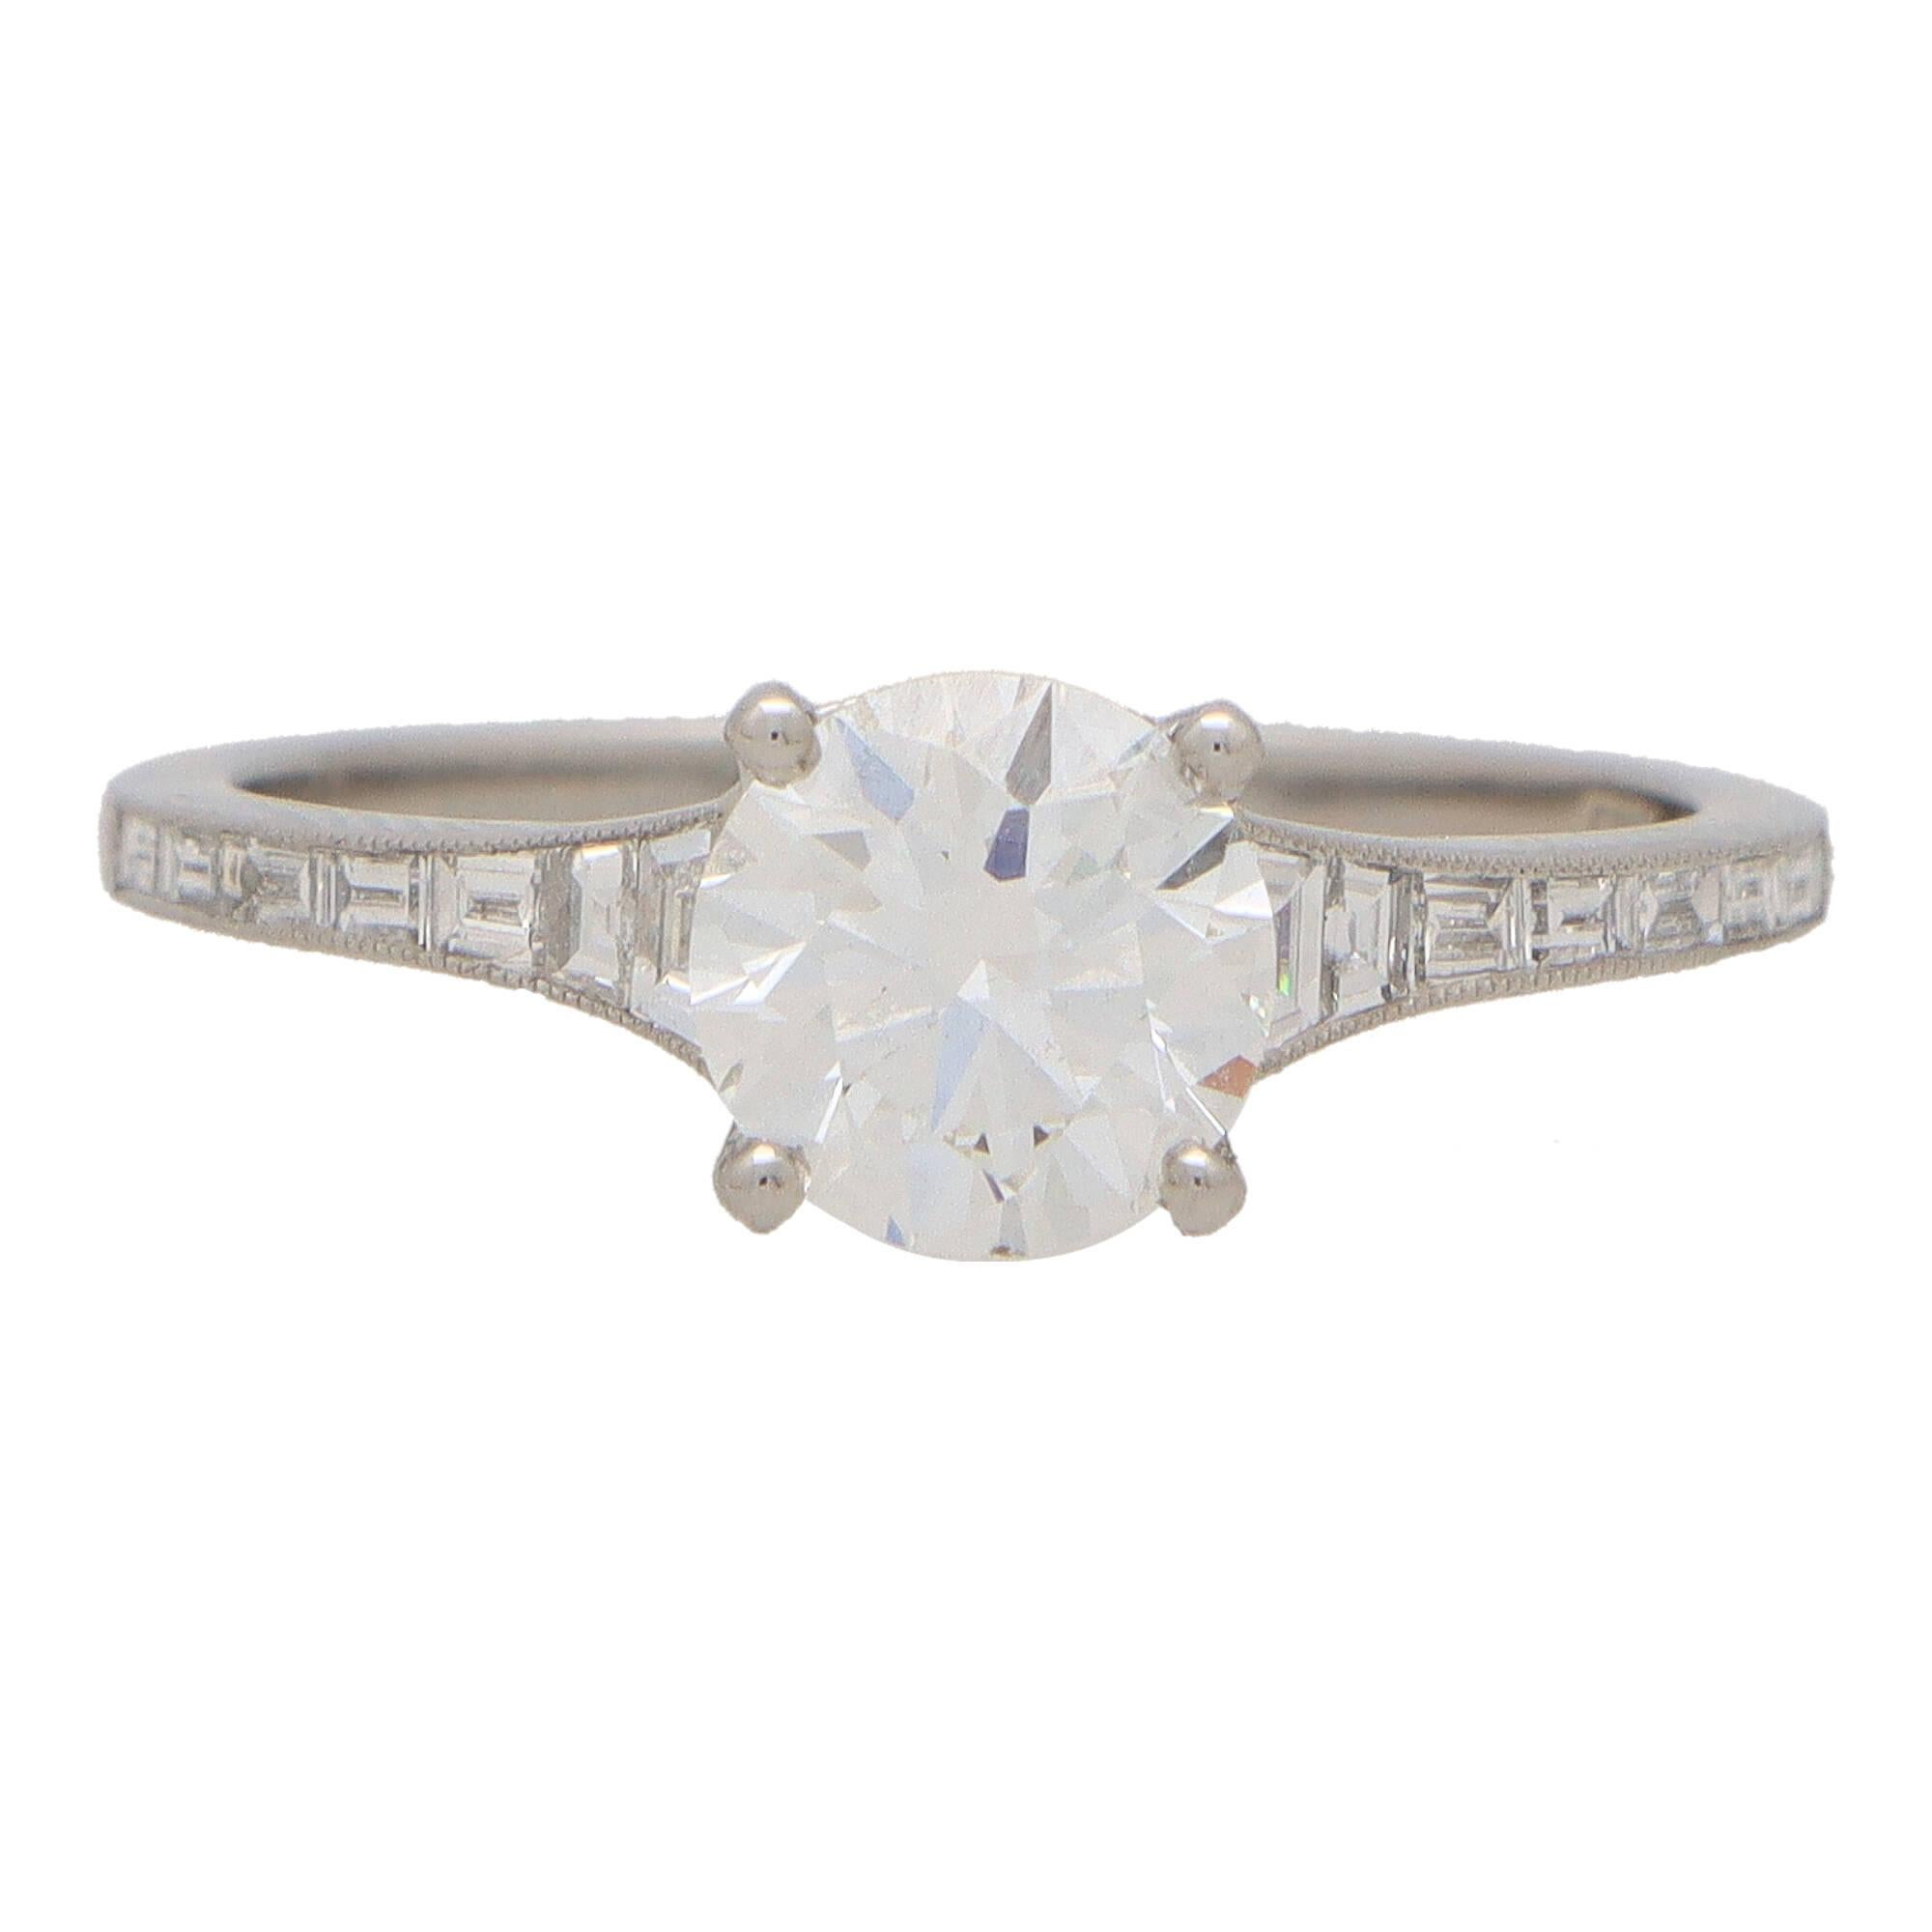 A beautiful Art Deco inspired round brilliant cut diamond ring set in platinum.

This sparkly piece is centrally set with an extremely elegant independently GIA certified round brilliant cut diamond. The diamond is securely four claw set to centre